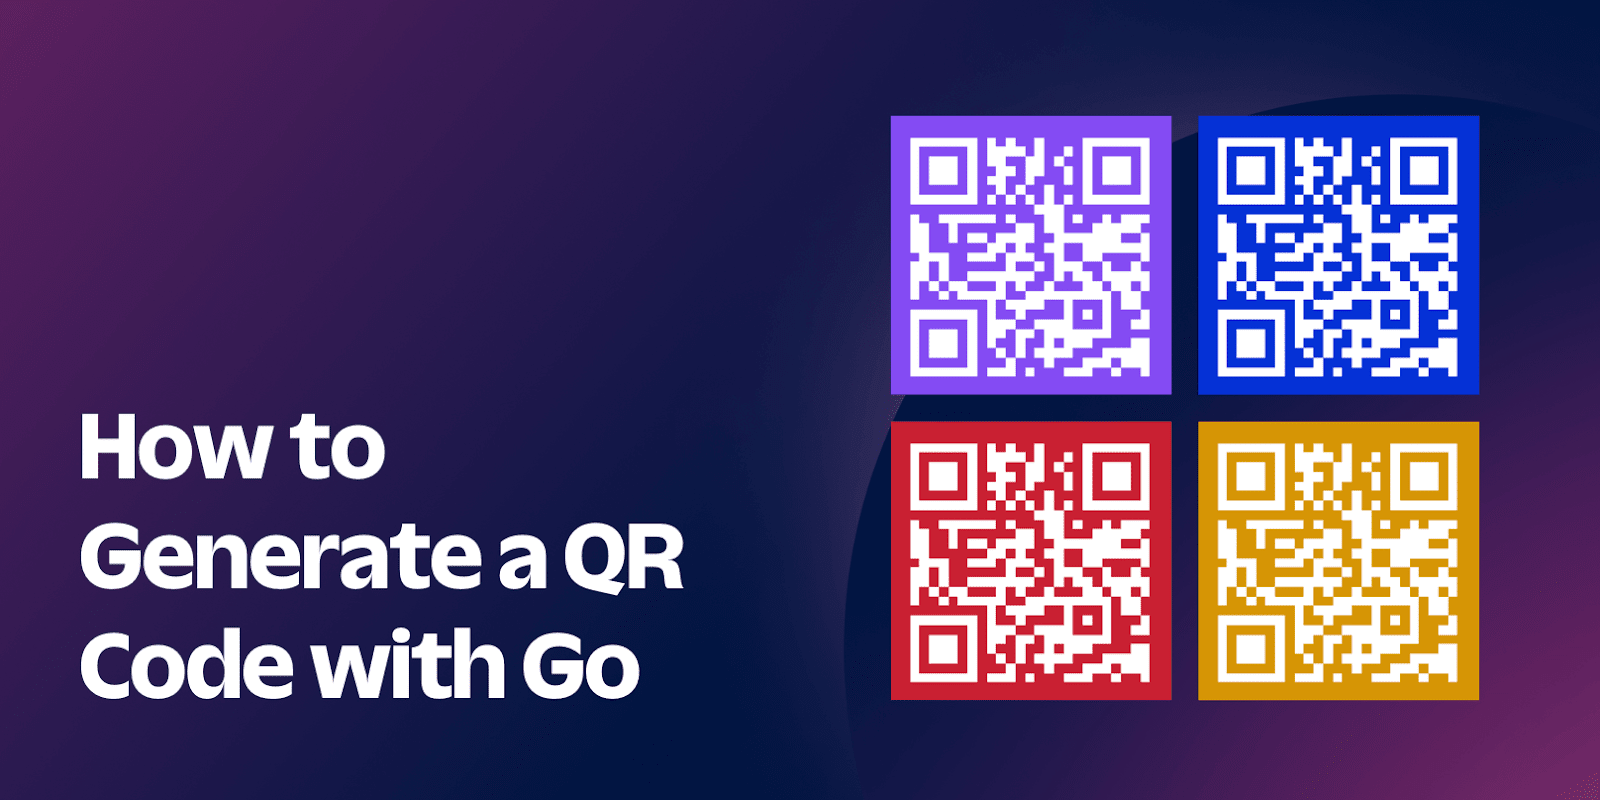 How to Generate a QR Code with Go